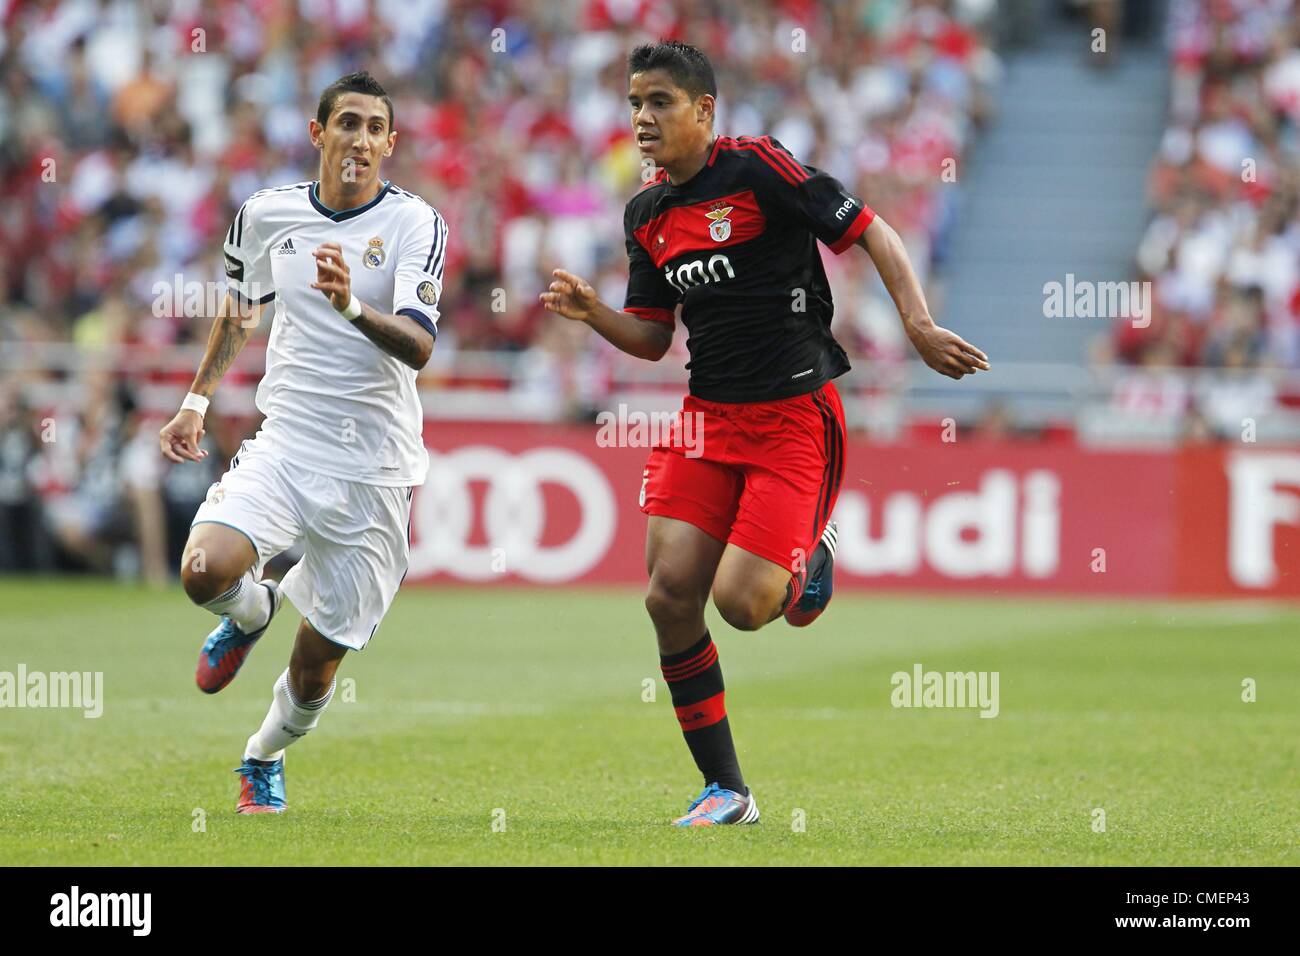 (L-R) Angel Di Maria (Real), Lorenzo Melgarejo (Benfica), JULY 27, 2012 - Football / Soccer : Pre season match 'Eusebio Cup' between Benfica and Real Madrid, at the Luz Stadium, Lisbon, Portugal, July 27, 2012. (Photo by AFLO) Stock Photo